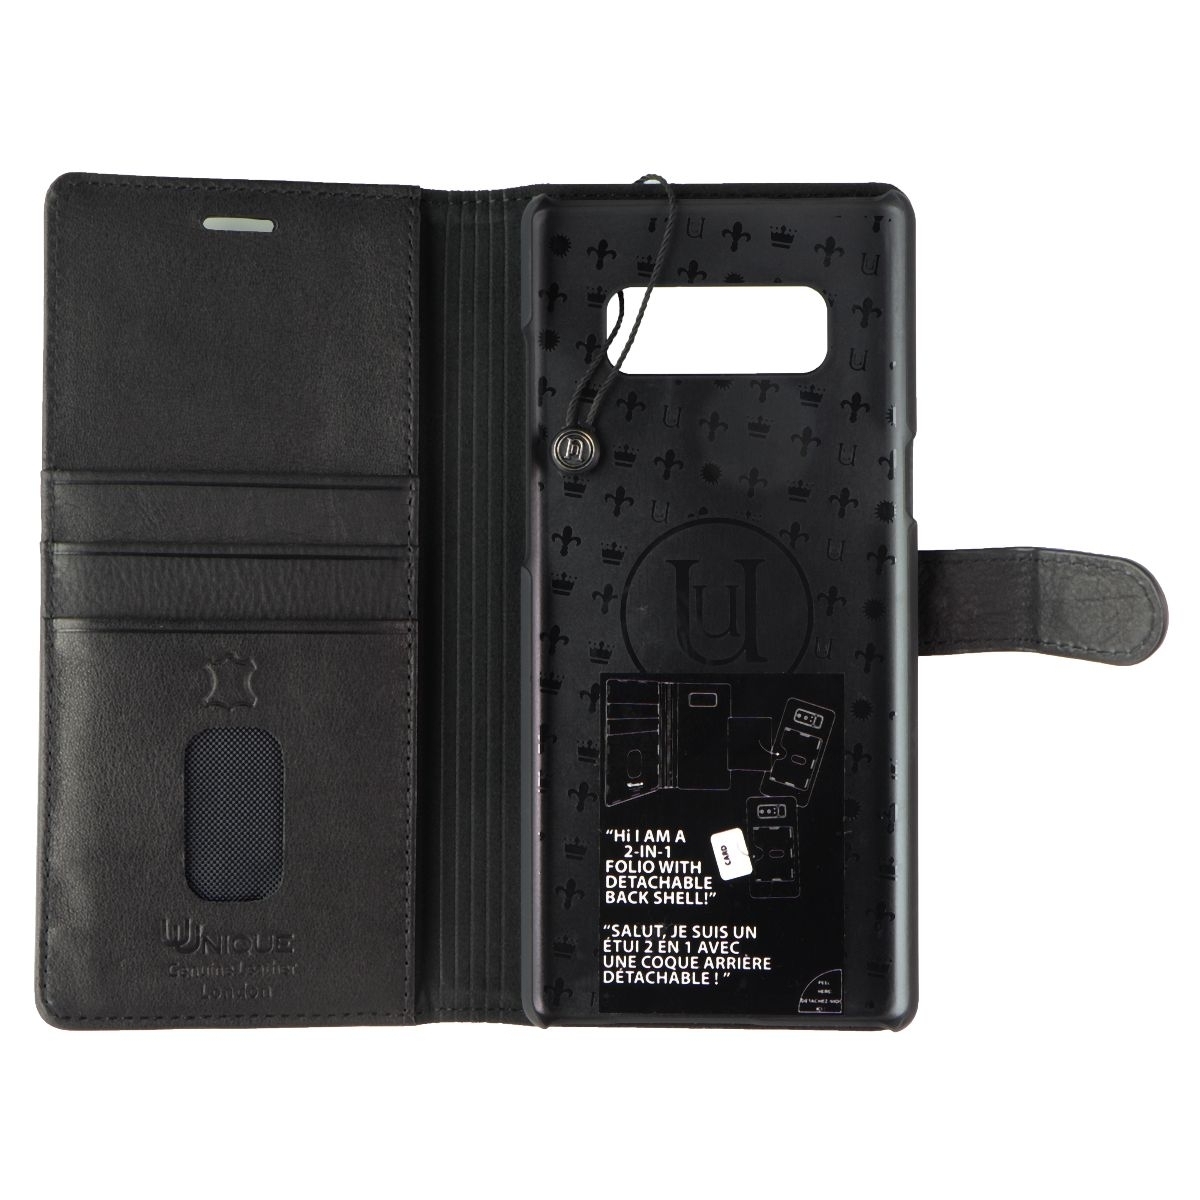 Unique London 2-in-1 Leather Folio + Case For Galaxy Note8 - Black (Refurbished)